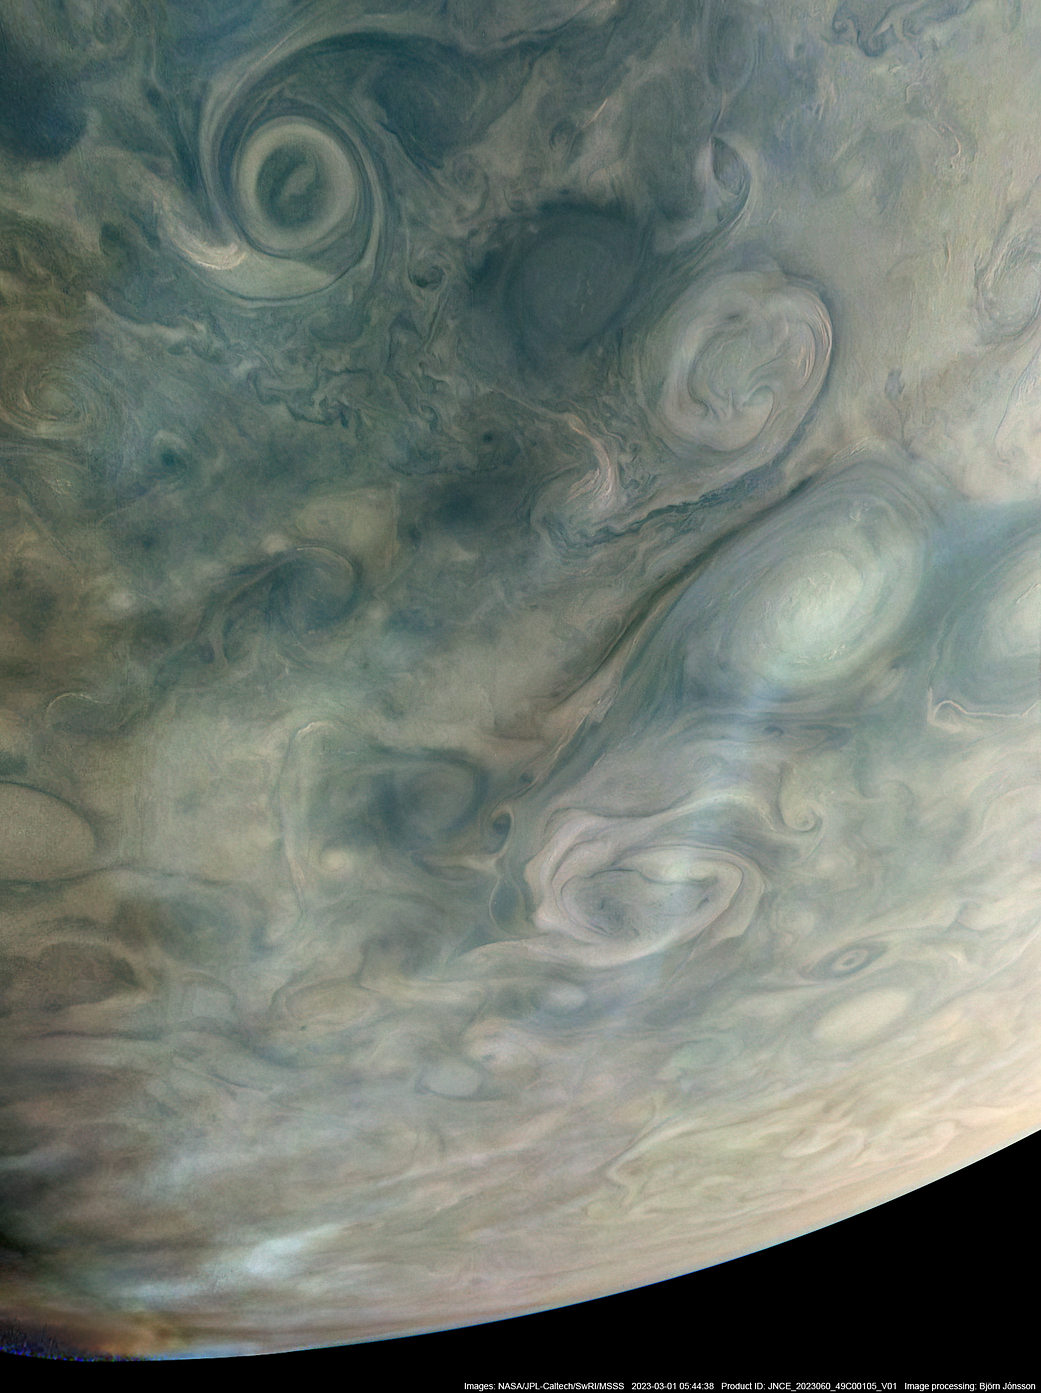 On Mar. 1, 2023, NASA's Juno mission completed its 49th close flyby of Jupiter. As the spacecraft flew low over the giant planet's cloud tops, its JunoCam instrument captured bands of high-altitude haze forming above cyclones in an area known at Jet N7.